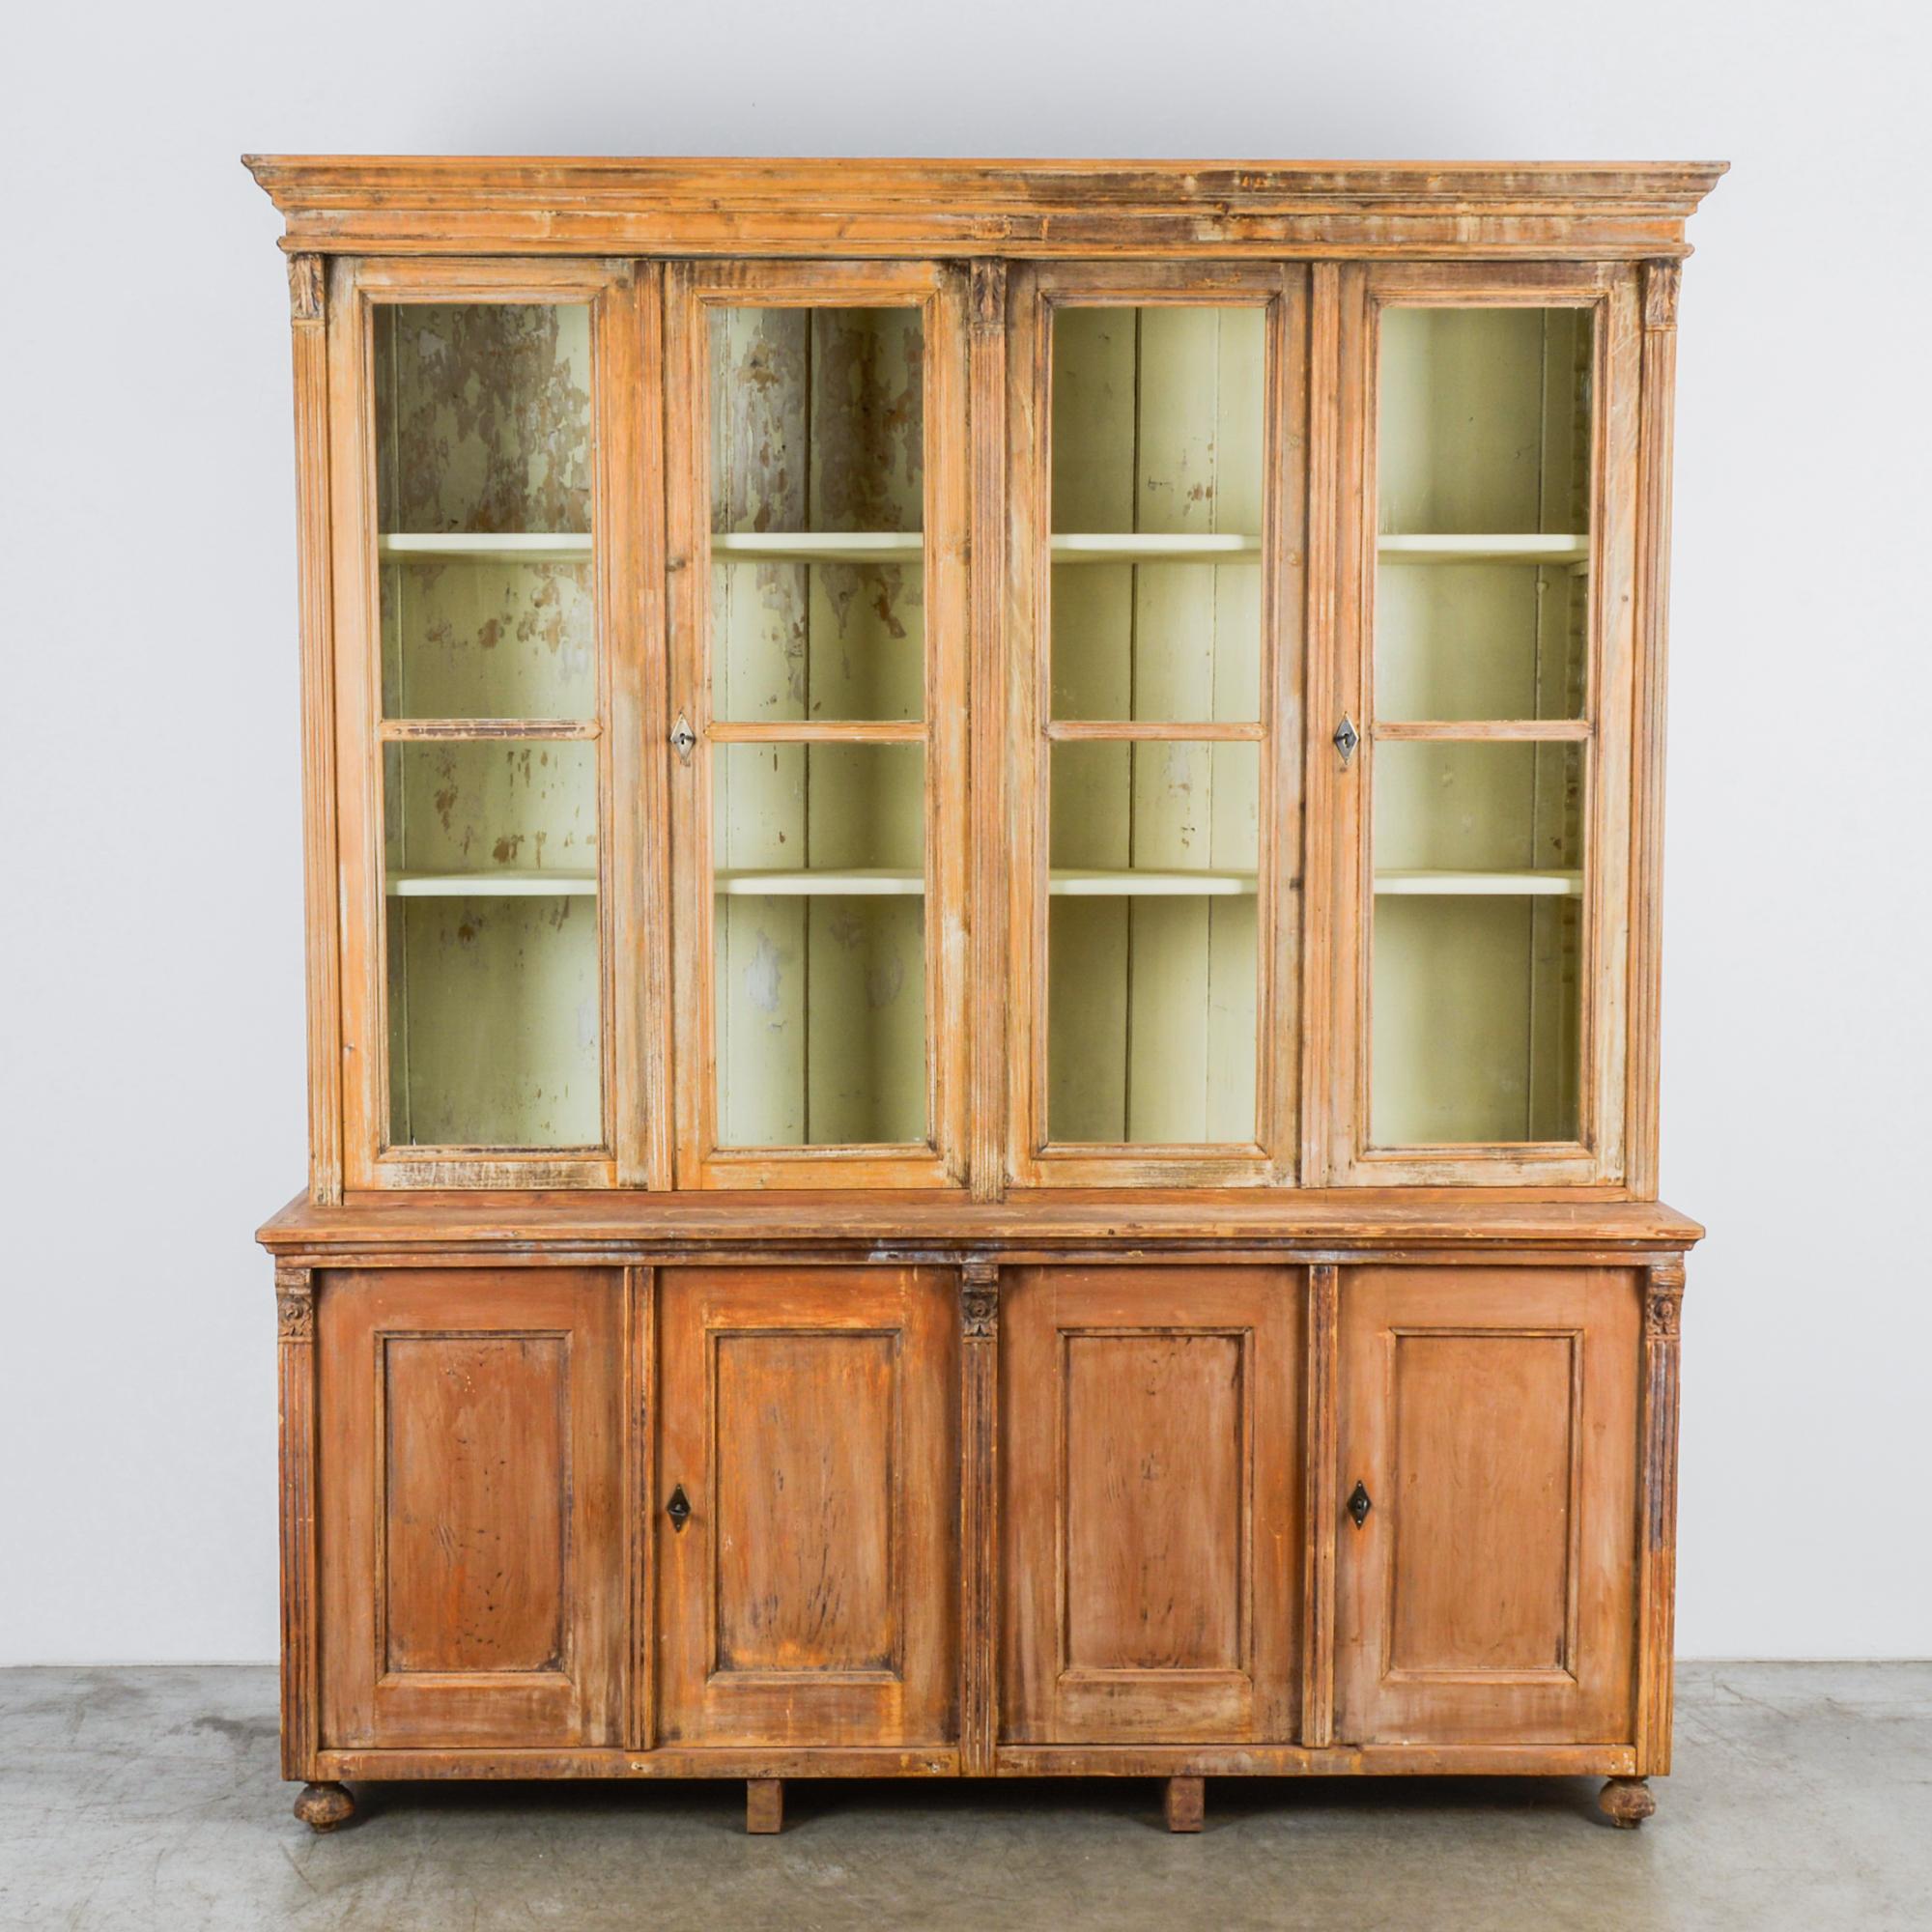 A softwood vitrine from Central Europe, circa 1900 with a beautiful age patina. This tall and timeless vitrine features two upper cabinets with glass-paneled double doors and two lower cabinets with wood-paneled double doors, separated by a shallow